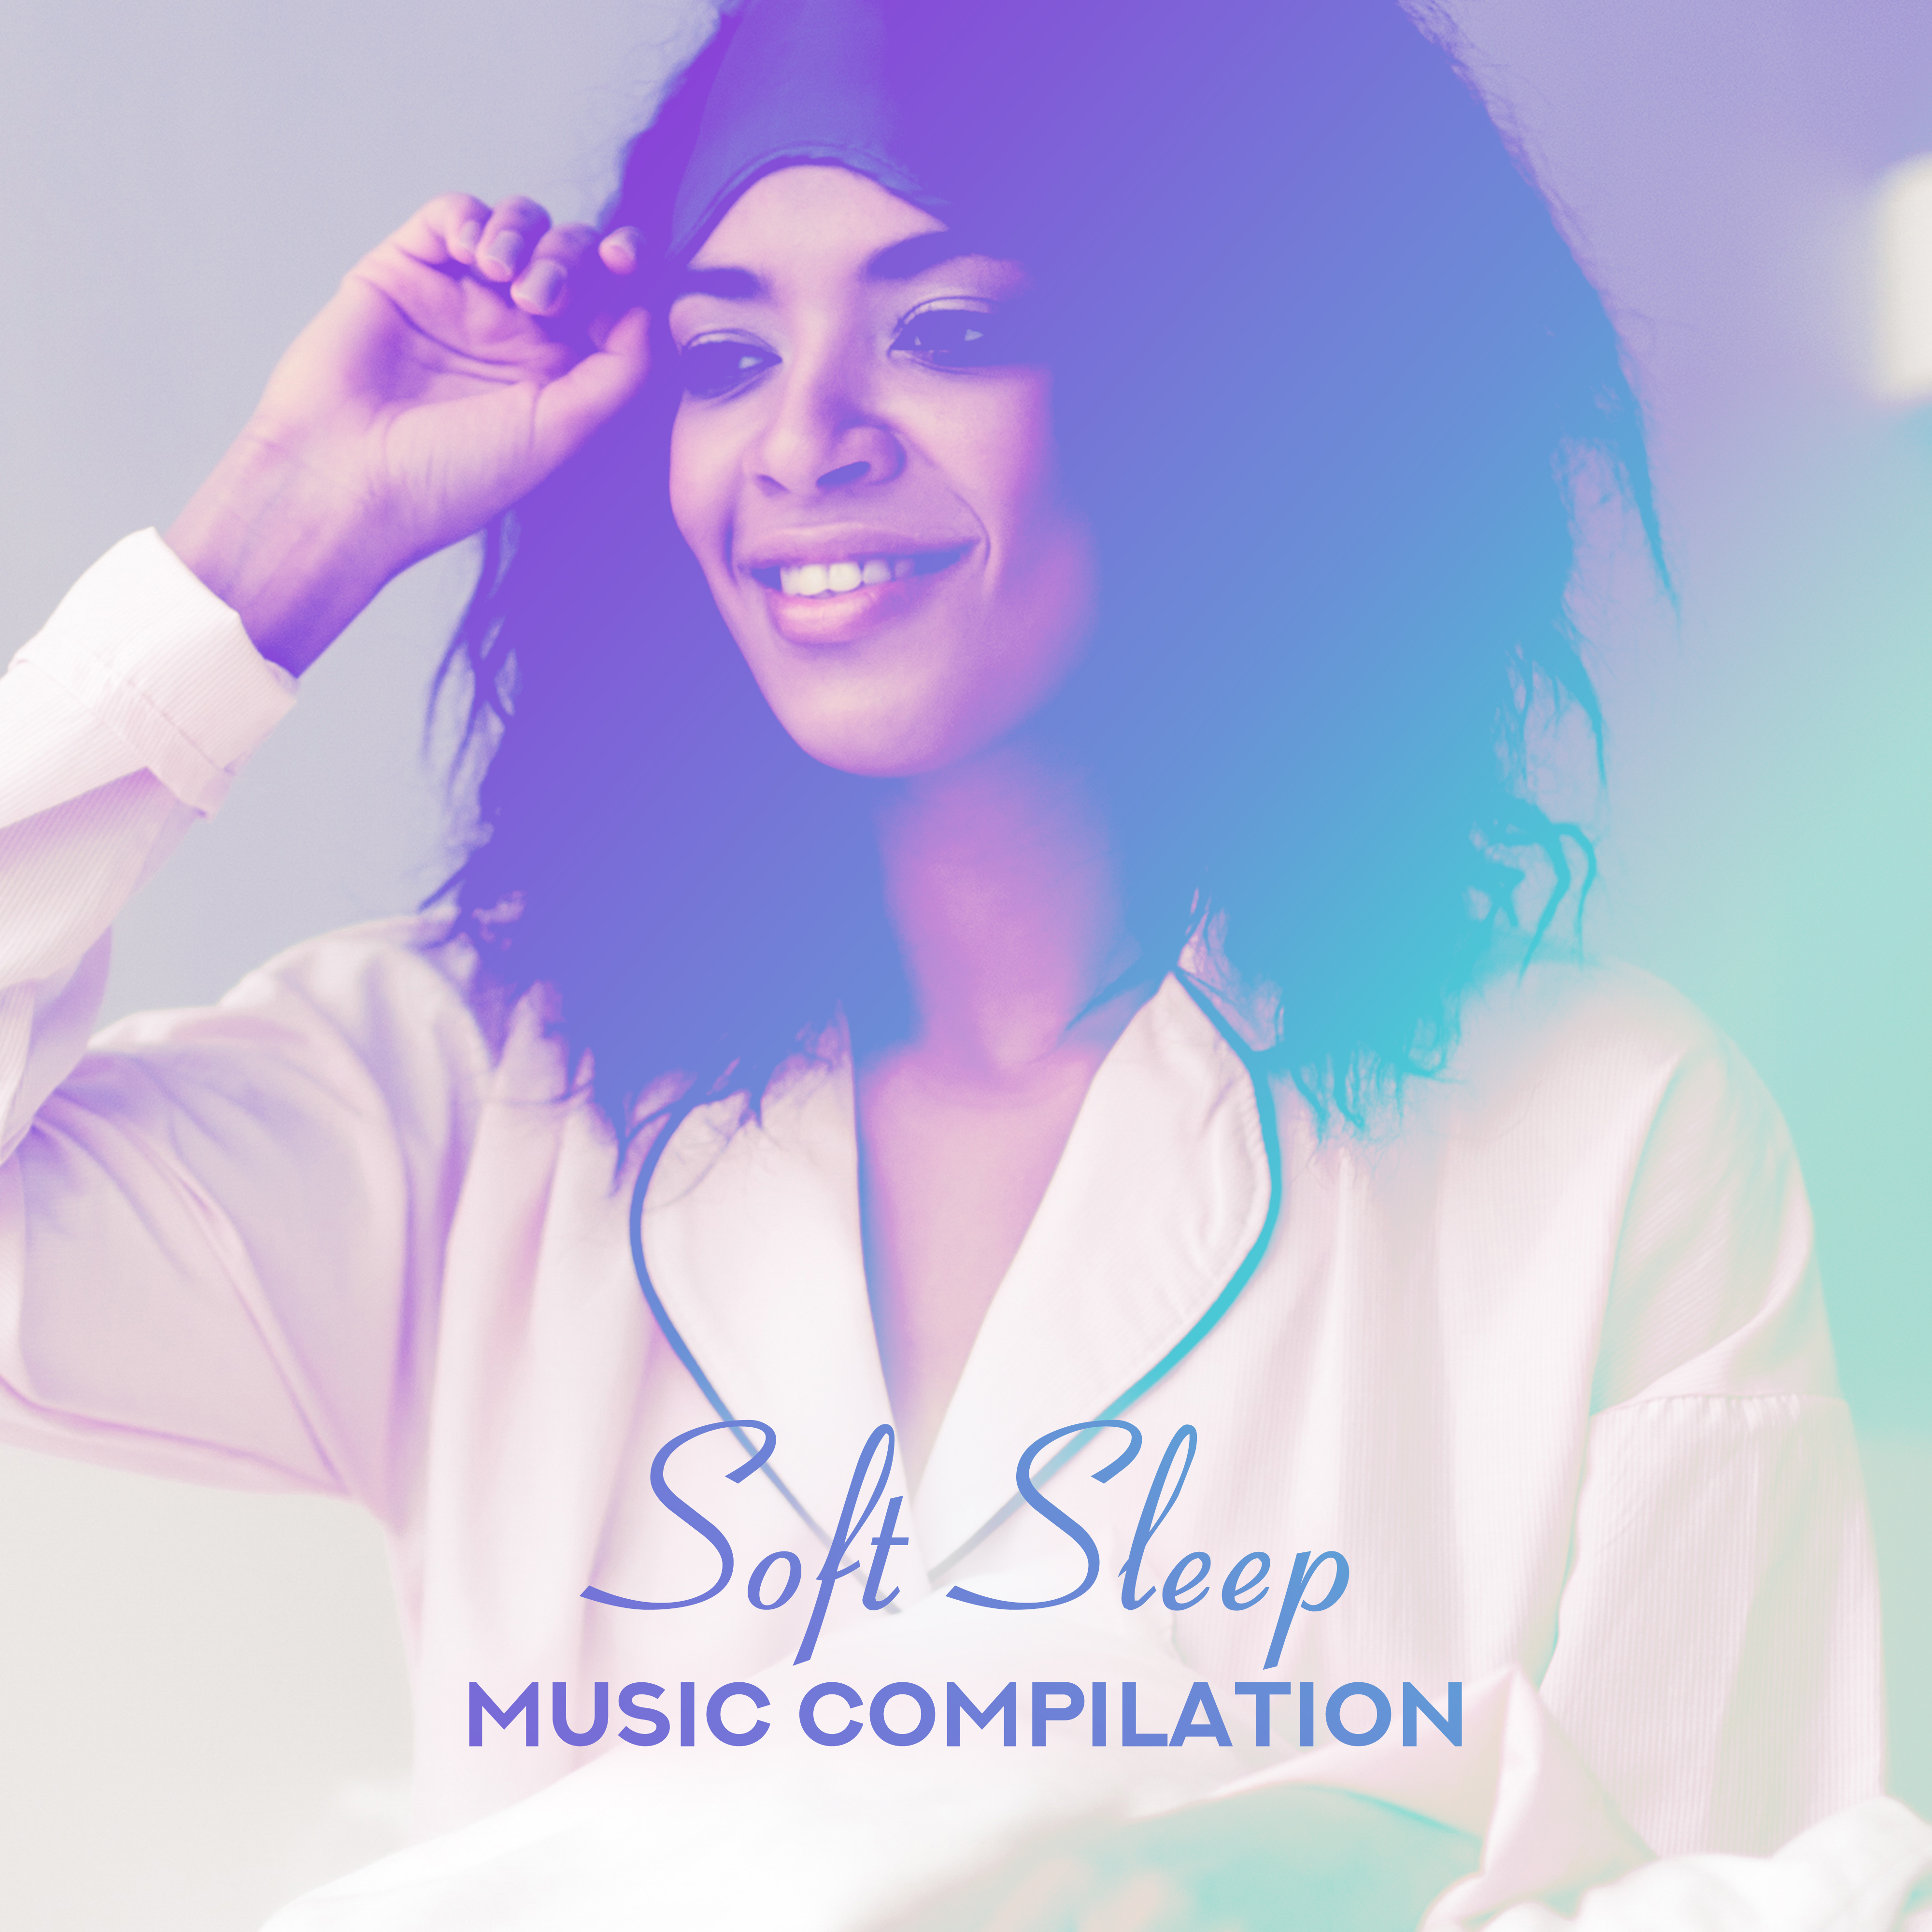 Soft Sleep Music Compilation – New Age Goodnight Lullabies, Sounds to Cure Insomnia, Sleep Deeply